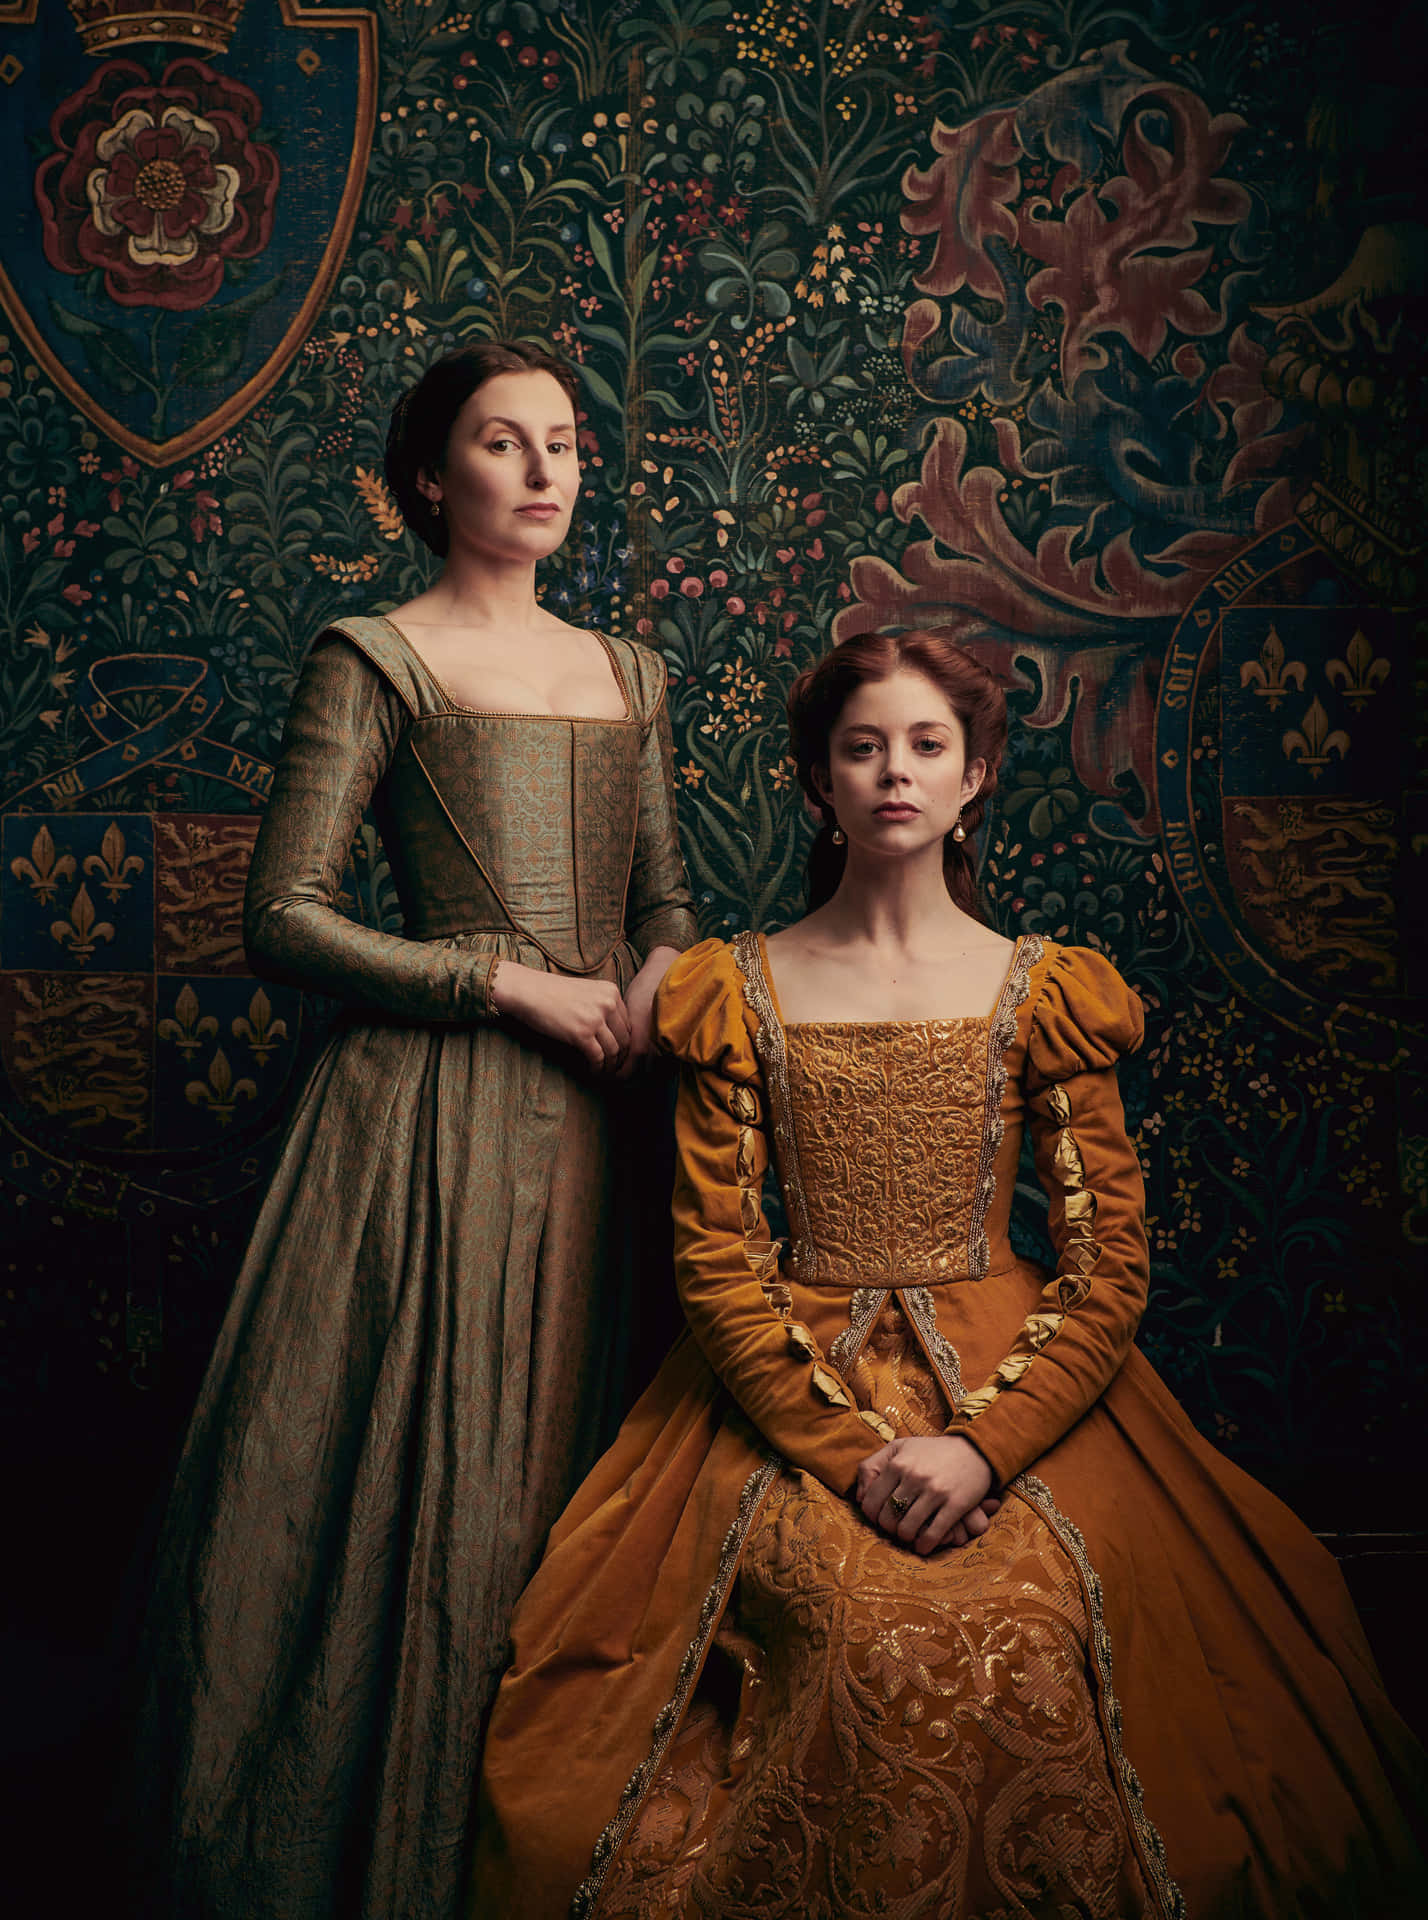 Two Women In Renaissance Dresses Posing For A Photo Wallpaper